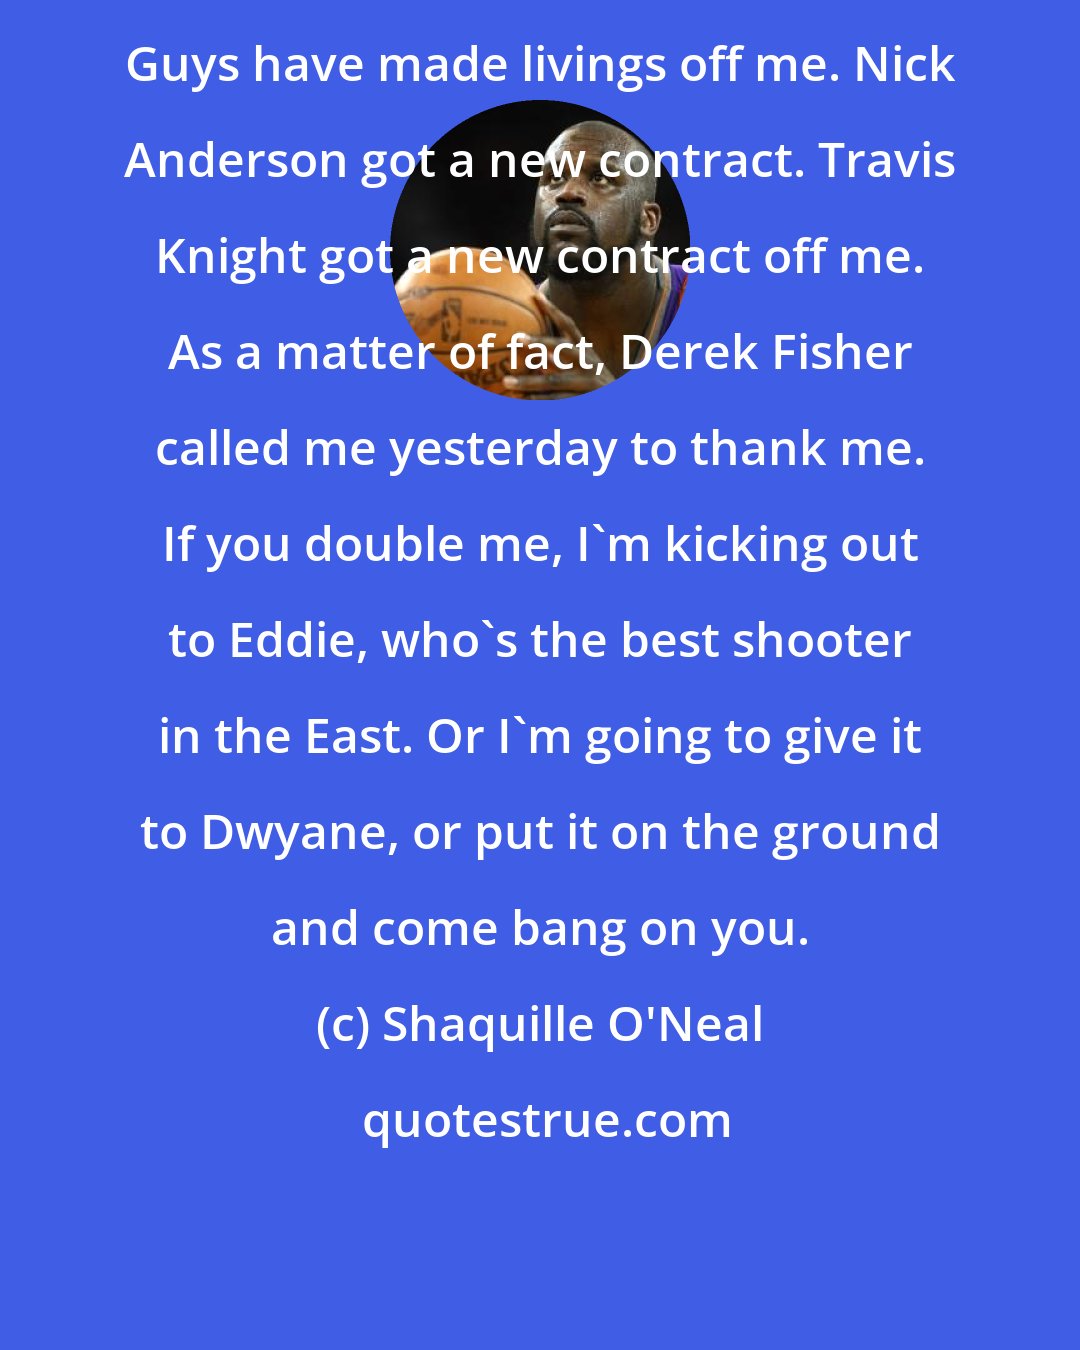 Shaquille O'Neal: Guys have made livings off me. Nick Anderson got a new contract. Travis Knight got a new contract off me. As a matter of fact, Derek Fisher called me yesterday to thank me. If you double me, I'm kicking out to Eddie, who's the best shooter in the East. Or I'm going to give it to Dwyane, or put it on the ground and come bang on you.